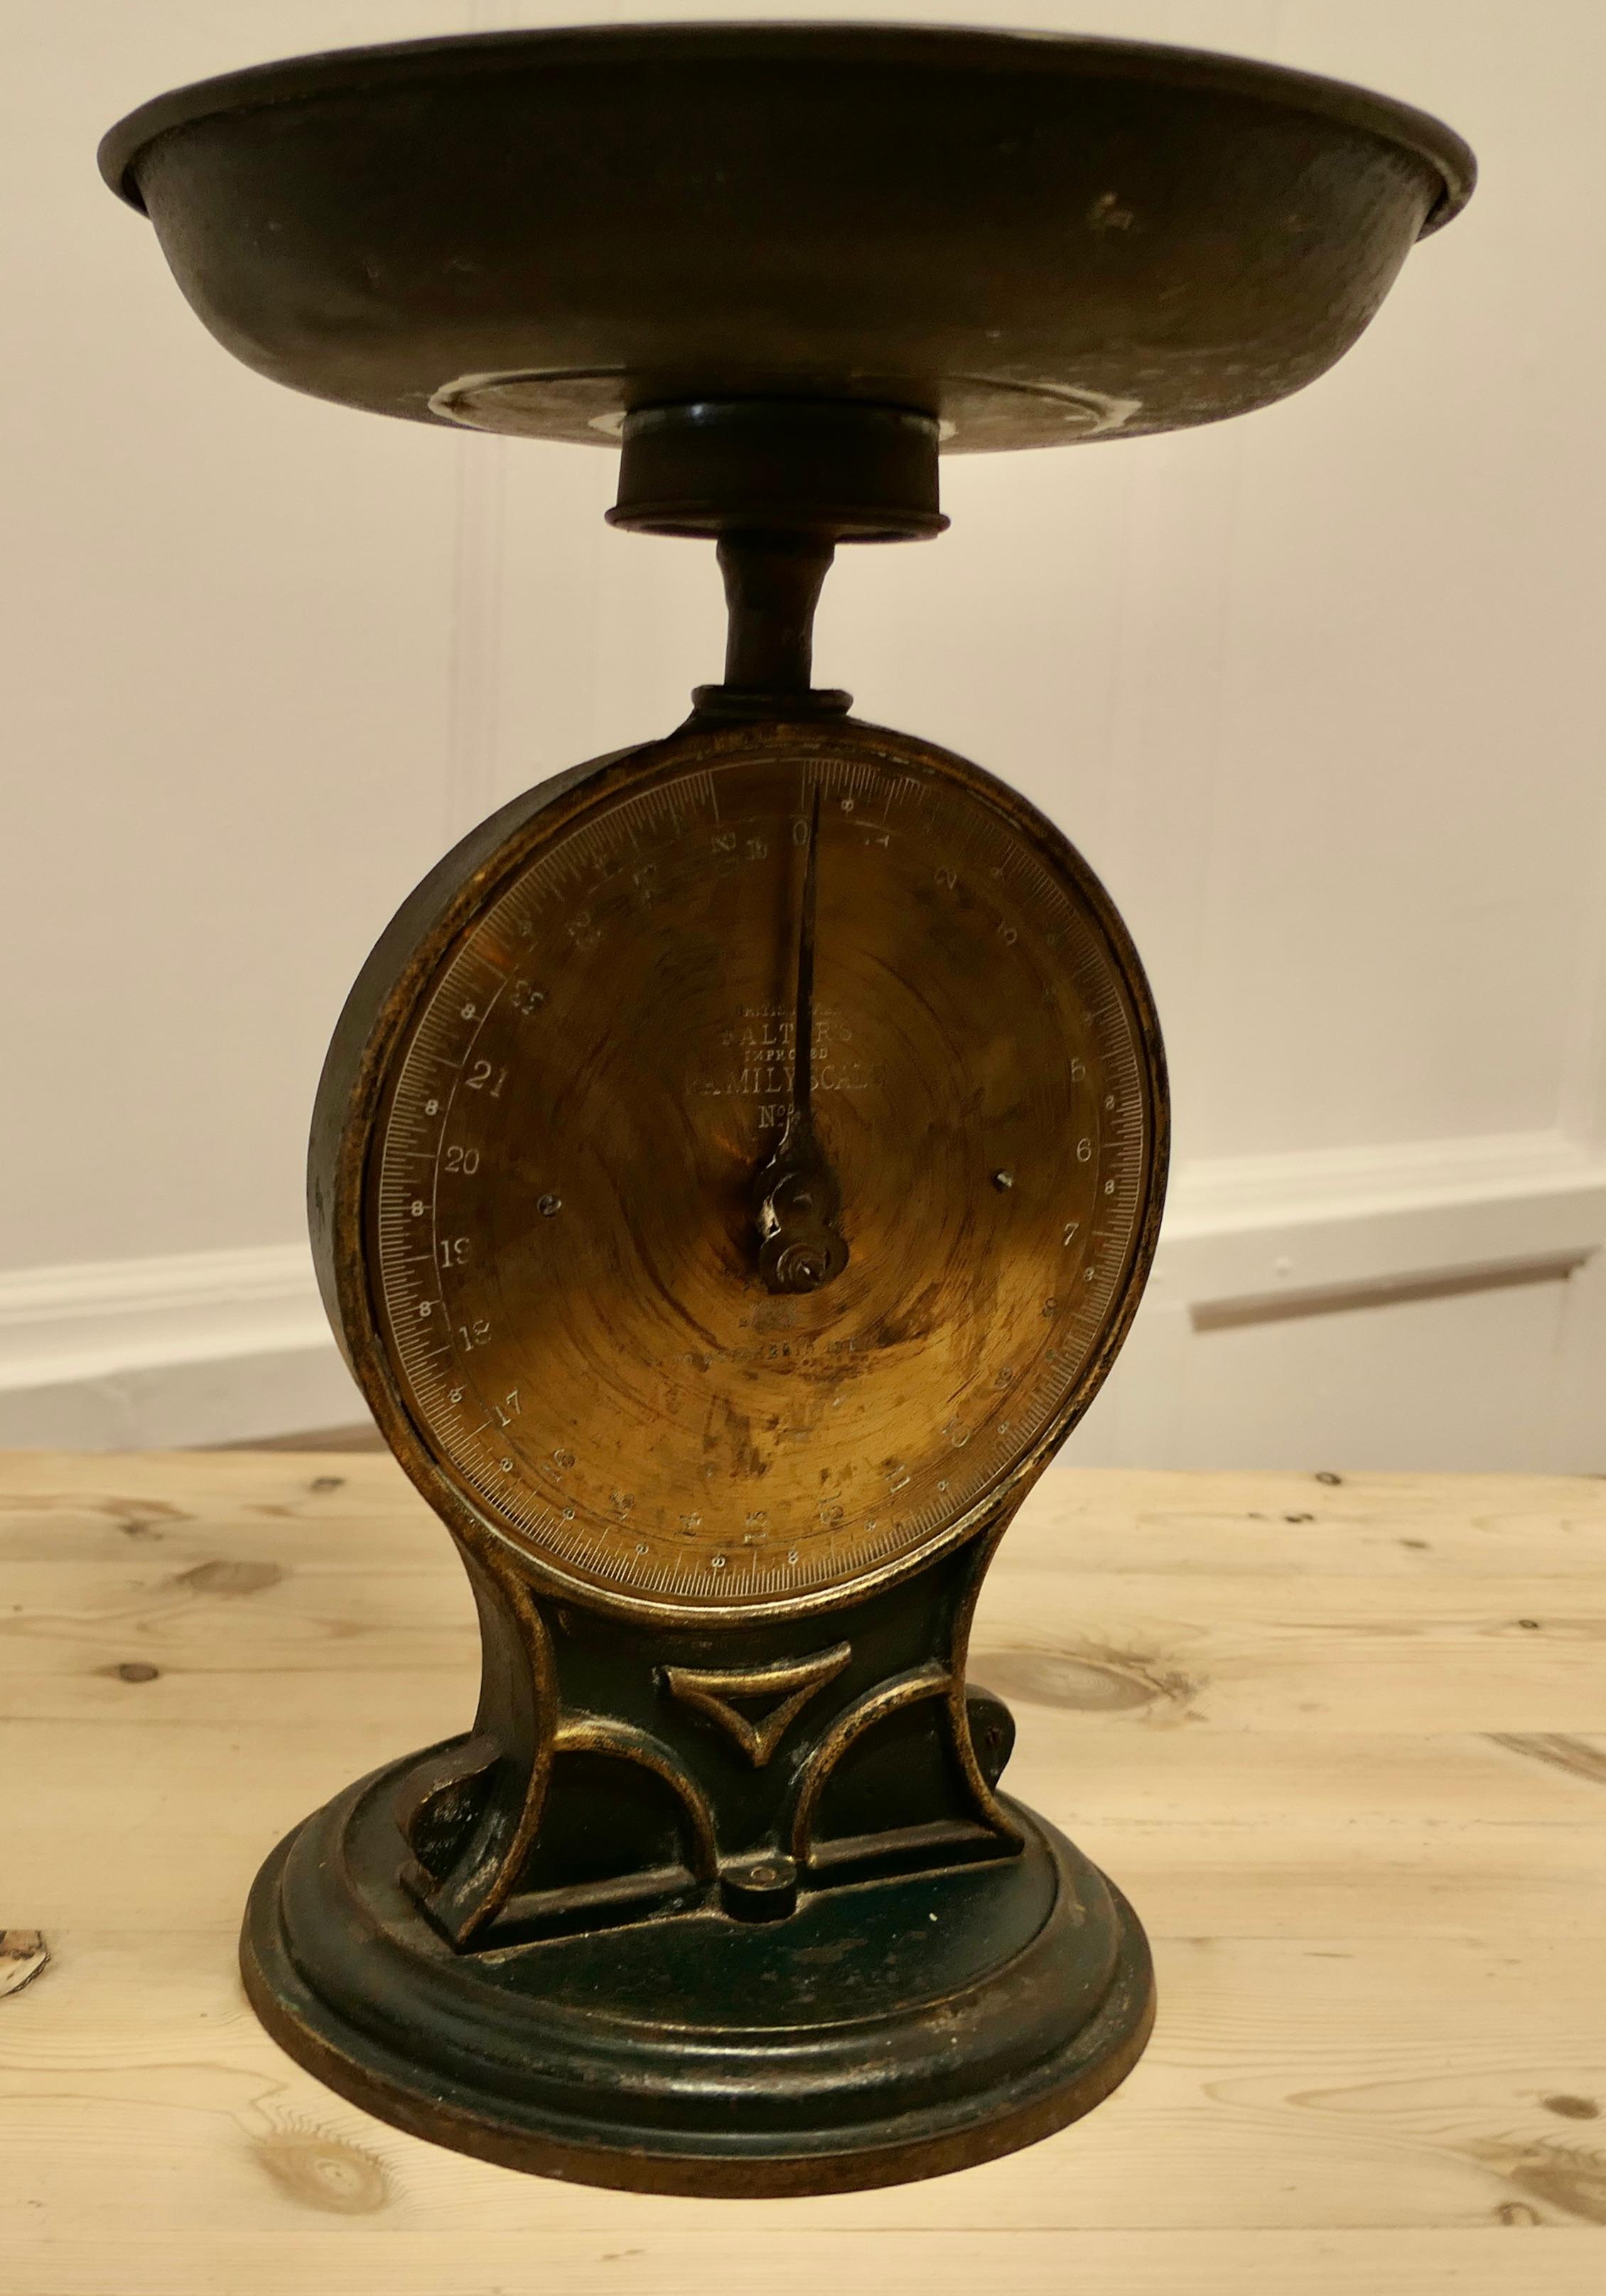 Antique Salter Family Scales  No 50
A well loved and used Family Scales, made by Salter, the cast iron body is in Dark green with Gold highlights, it has a removable tin tray on the top and a Brass face
Good Used condition and fully functional,